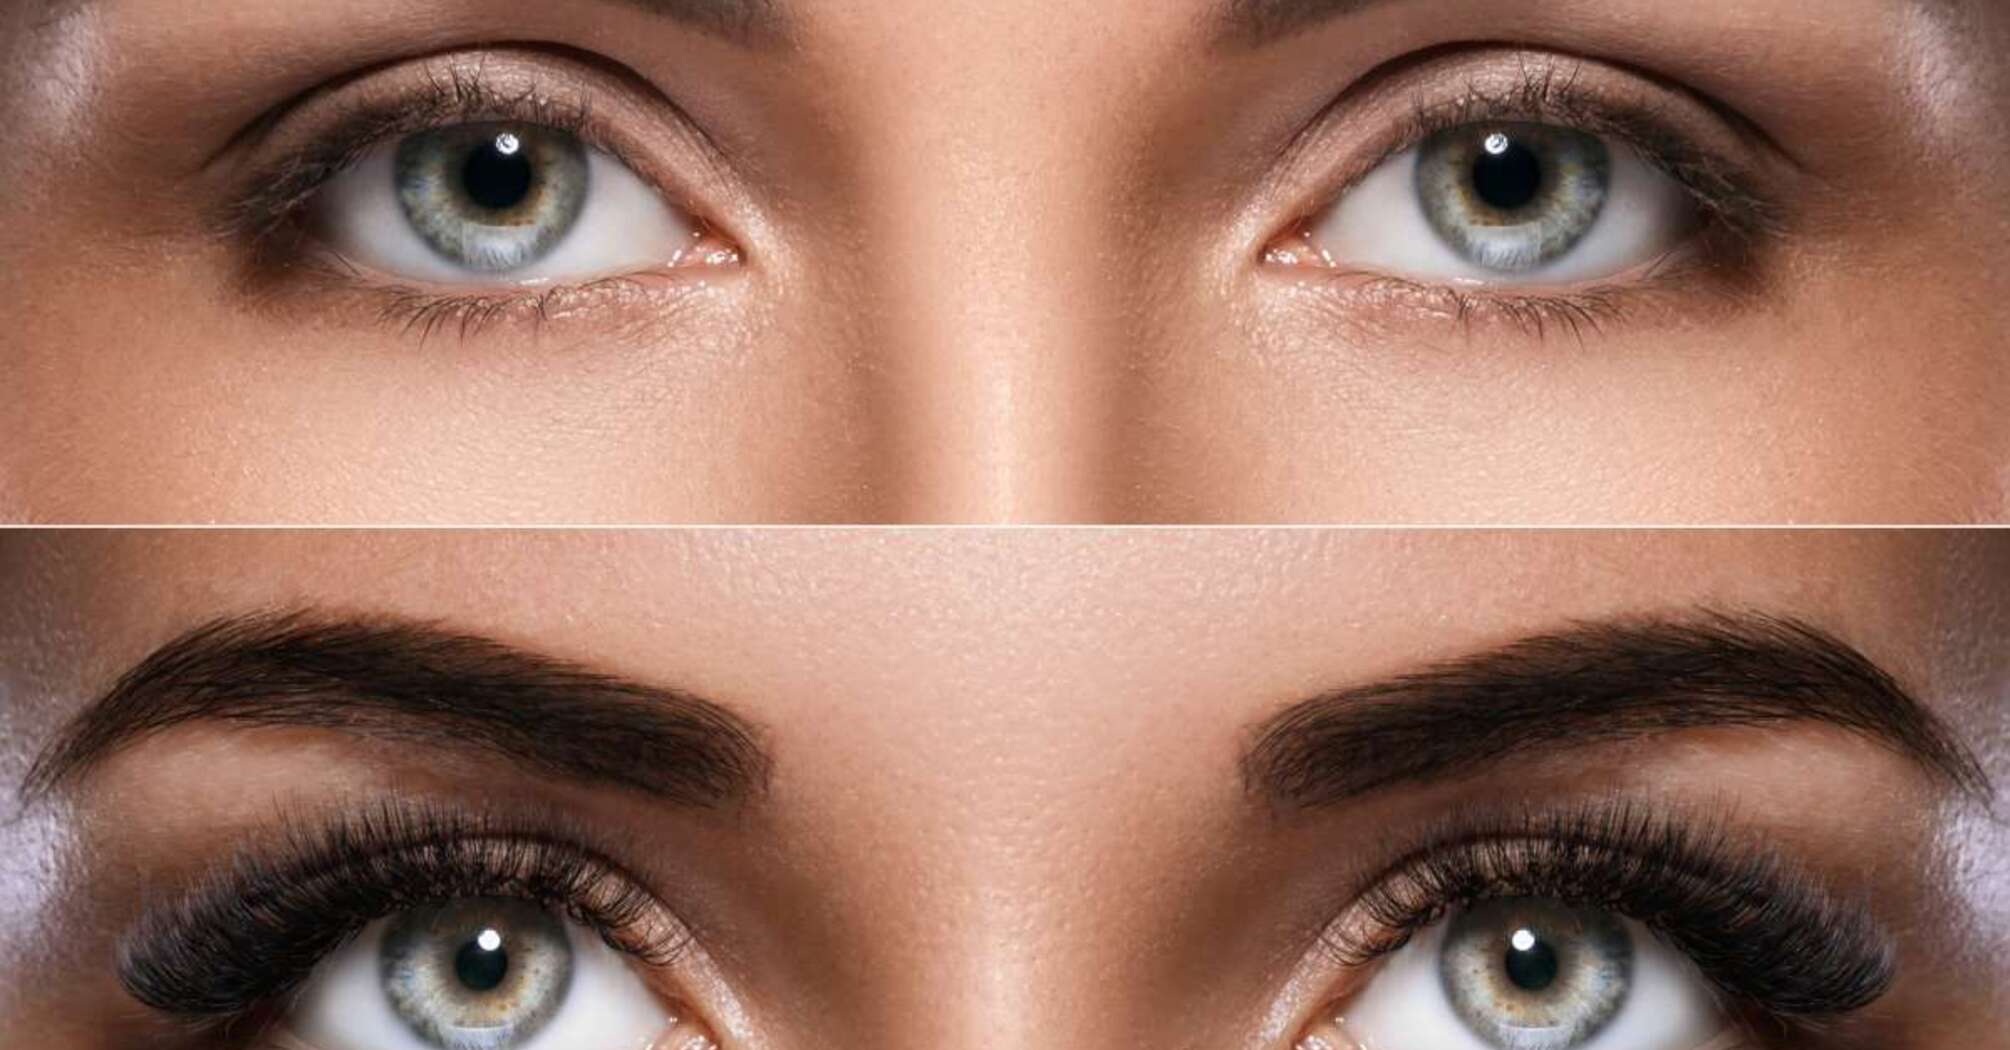 Eyebrow tattooing or microblading